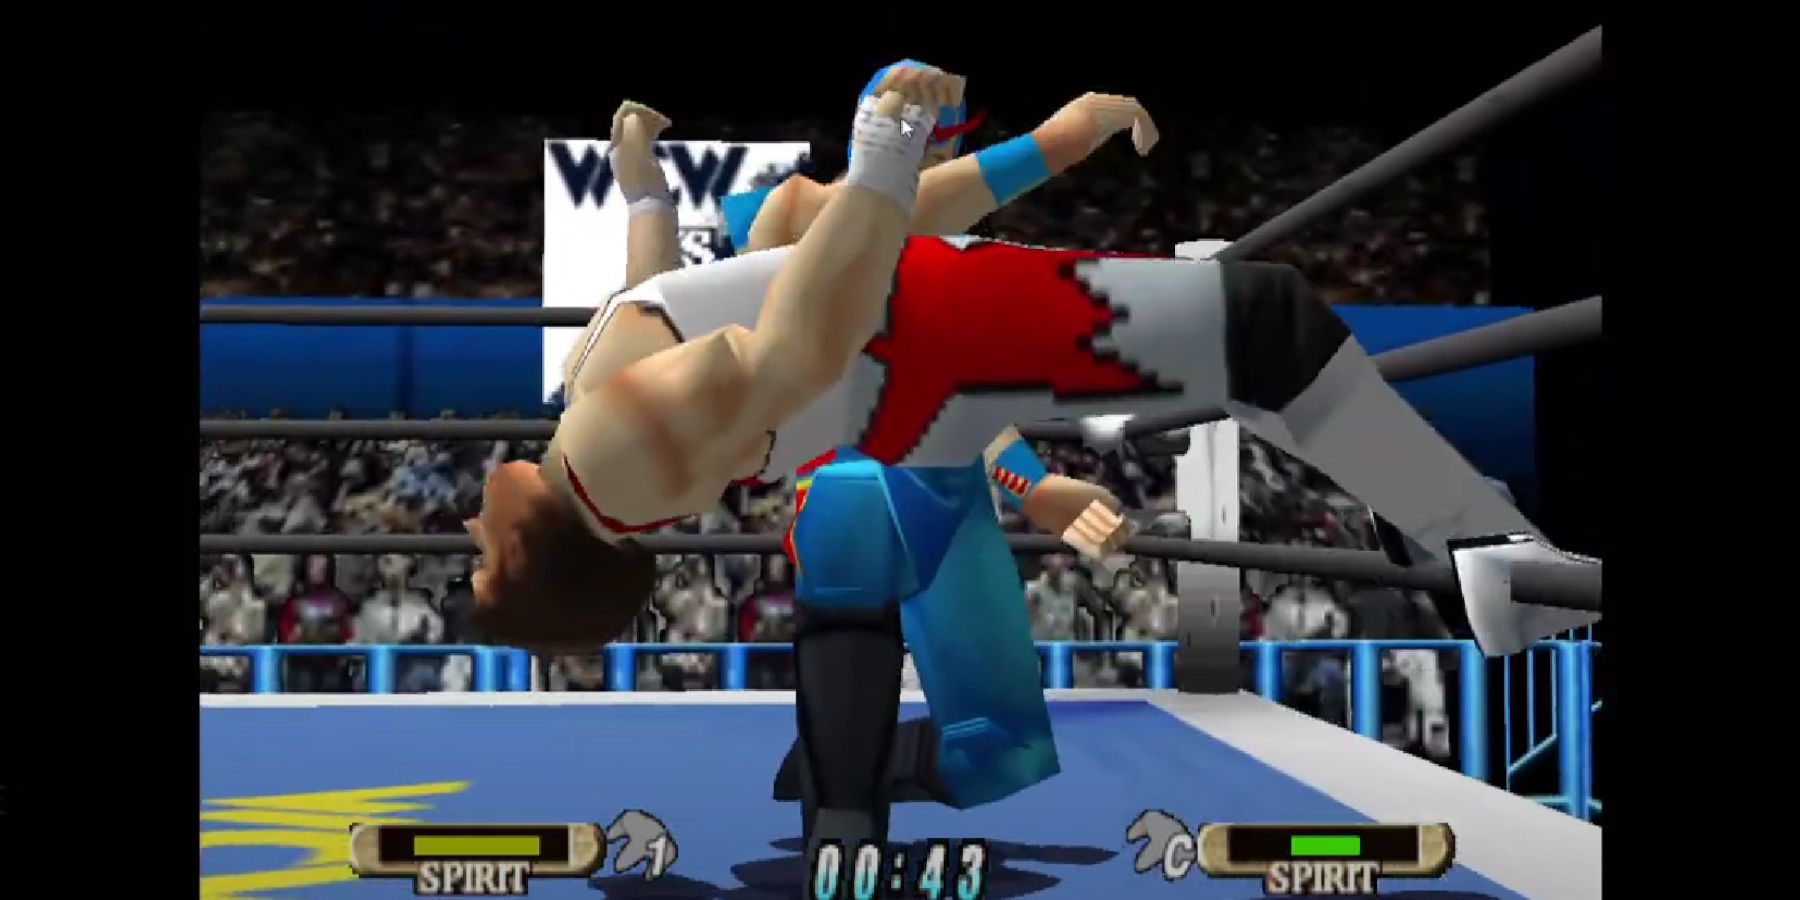 WCW vs NWO World Tour - Ultimo Dragon with a Backbreaker on Eddie Guerrero